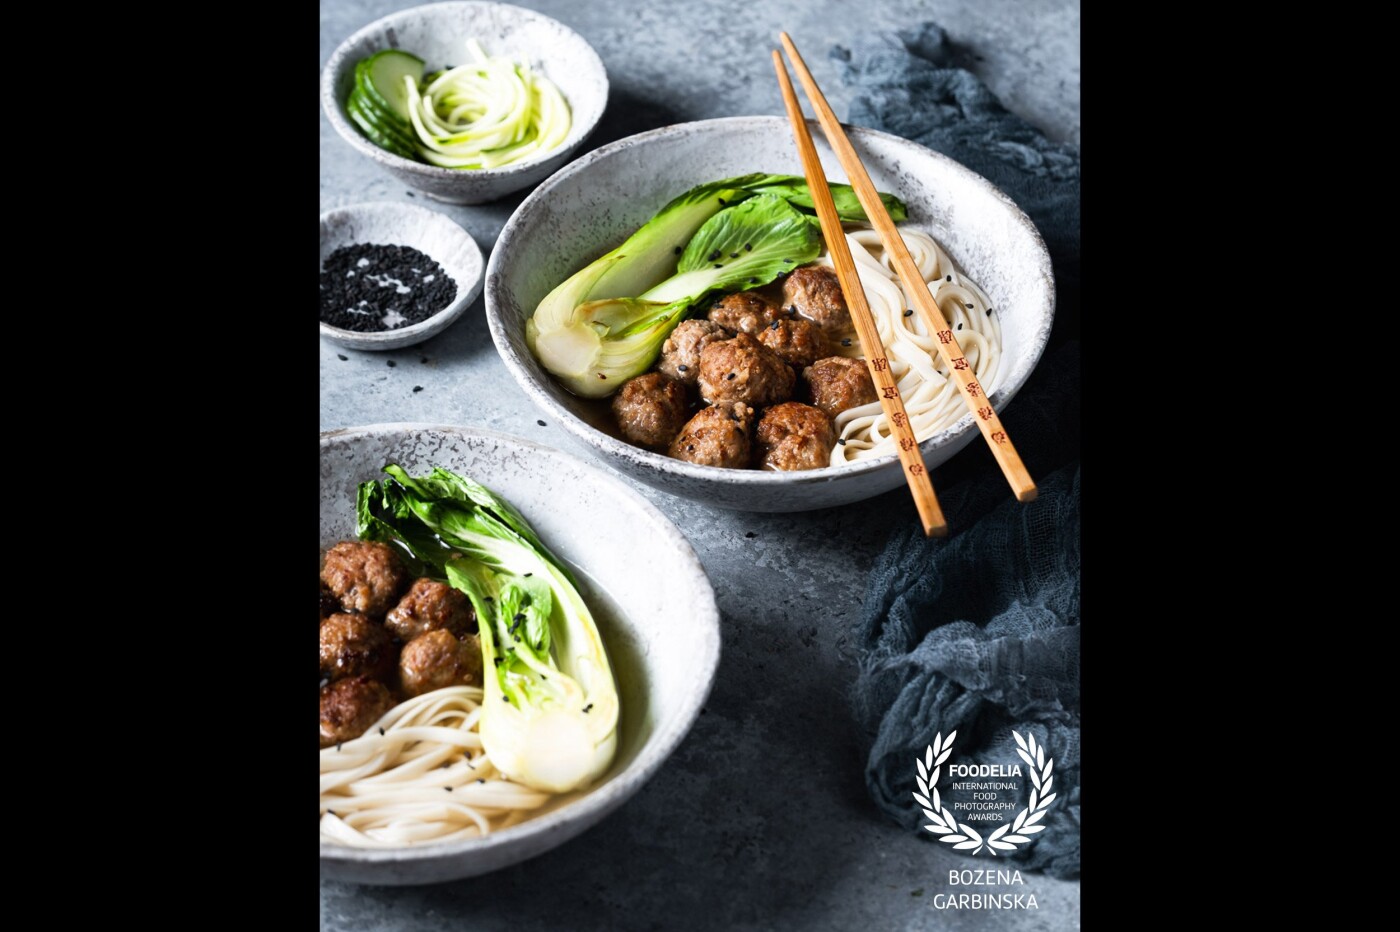 Meatballs with noodles and pak choi.<br />
Camera: Fuji X-T3<br />
Lens: Fujinon 80 mm<br />
Settings: ISO 320, 1/5 s, f/5.6<br />
Shot using artificial light.